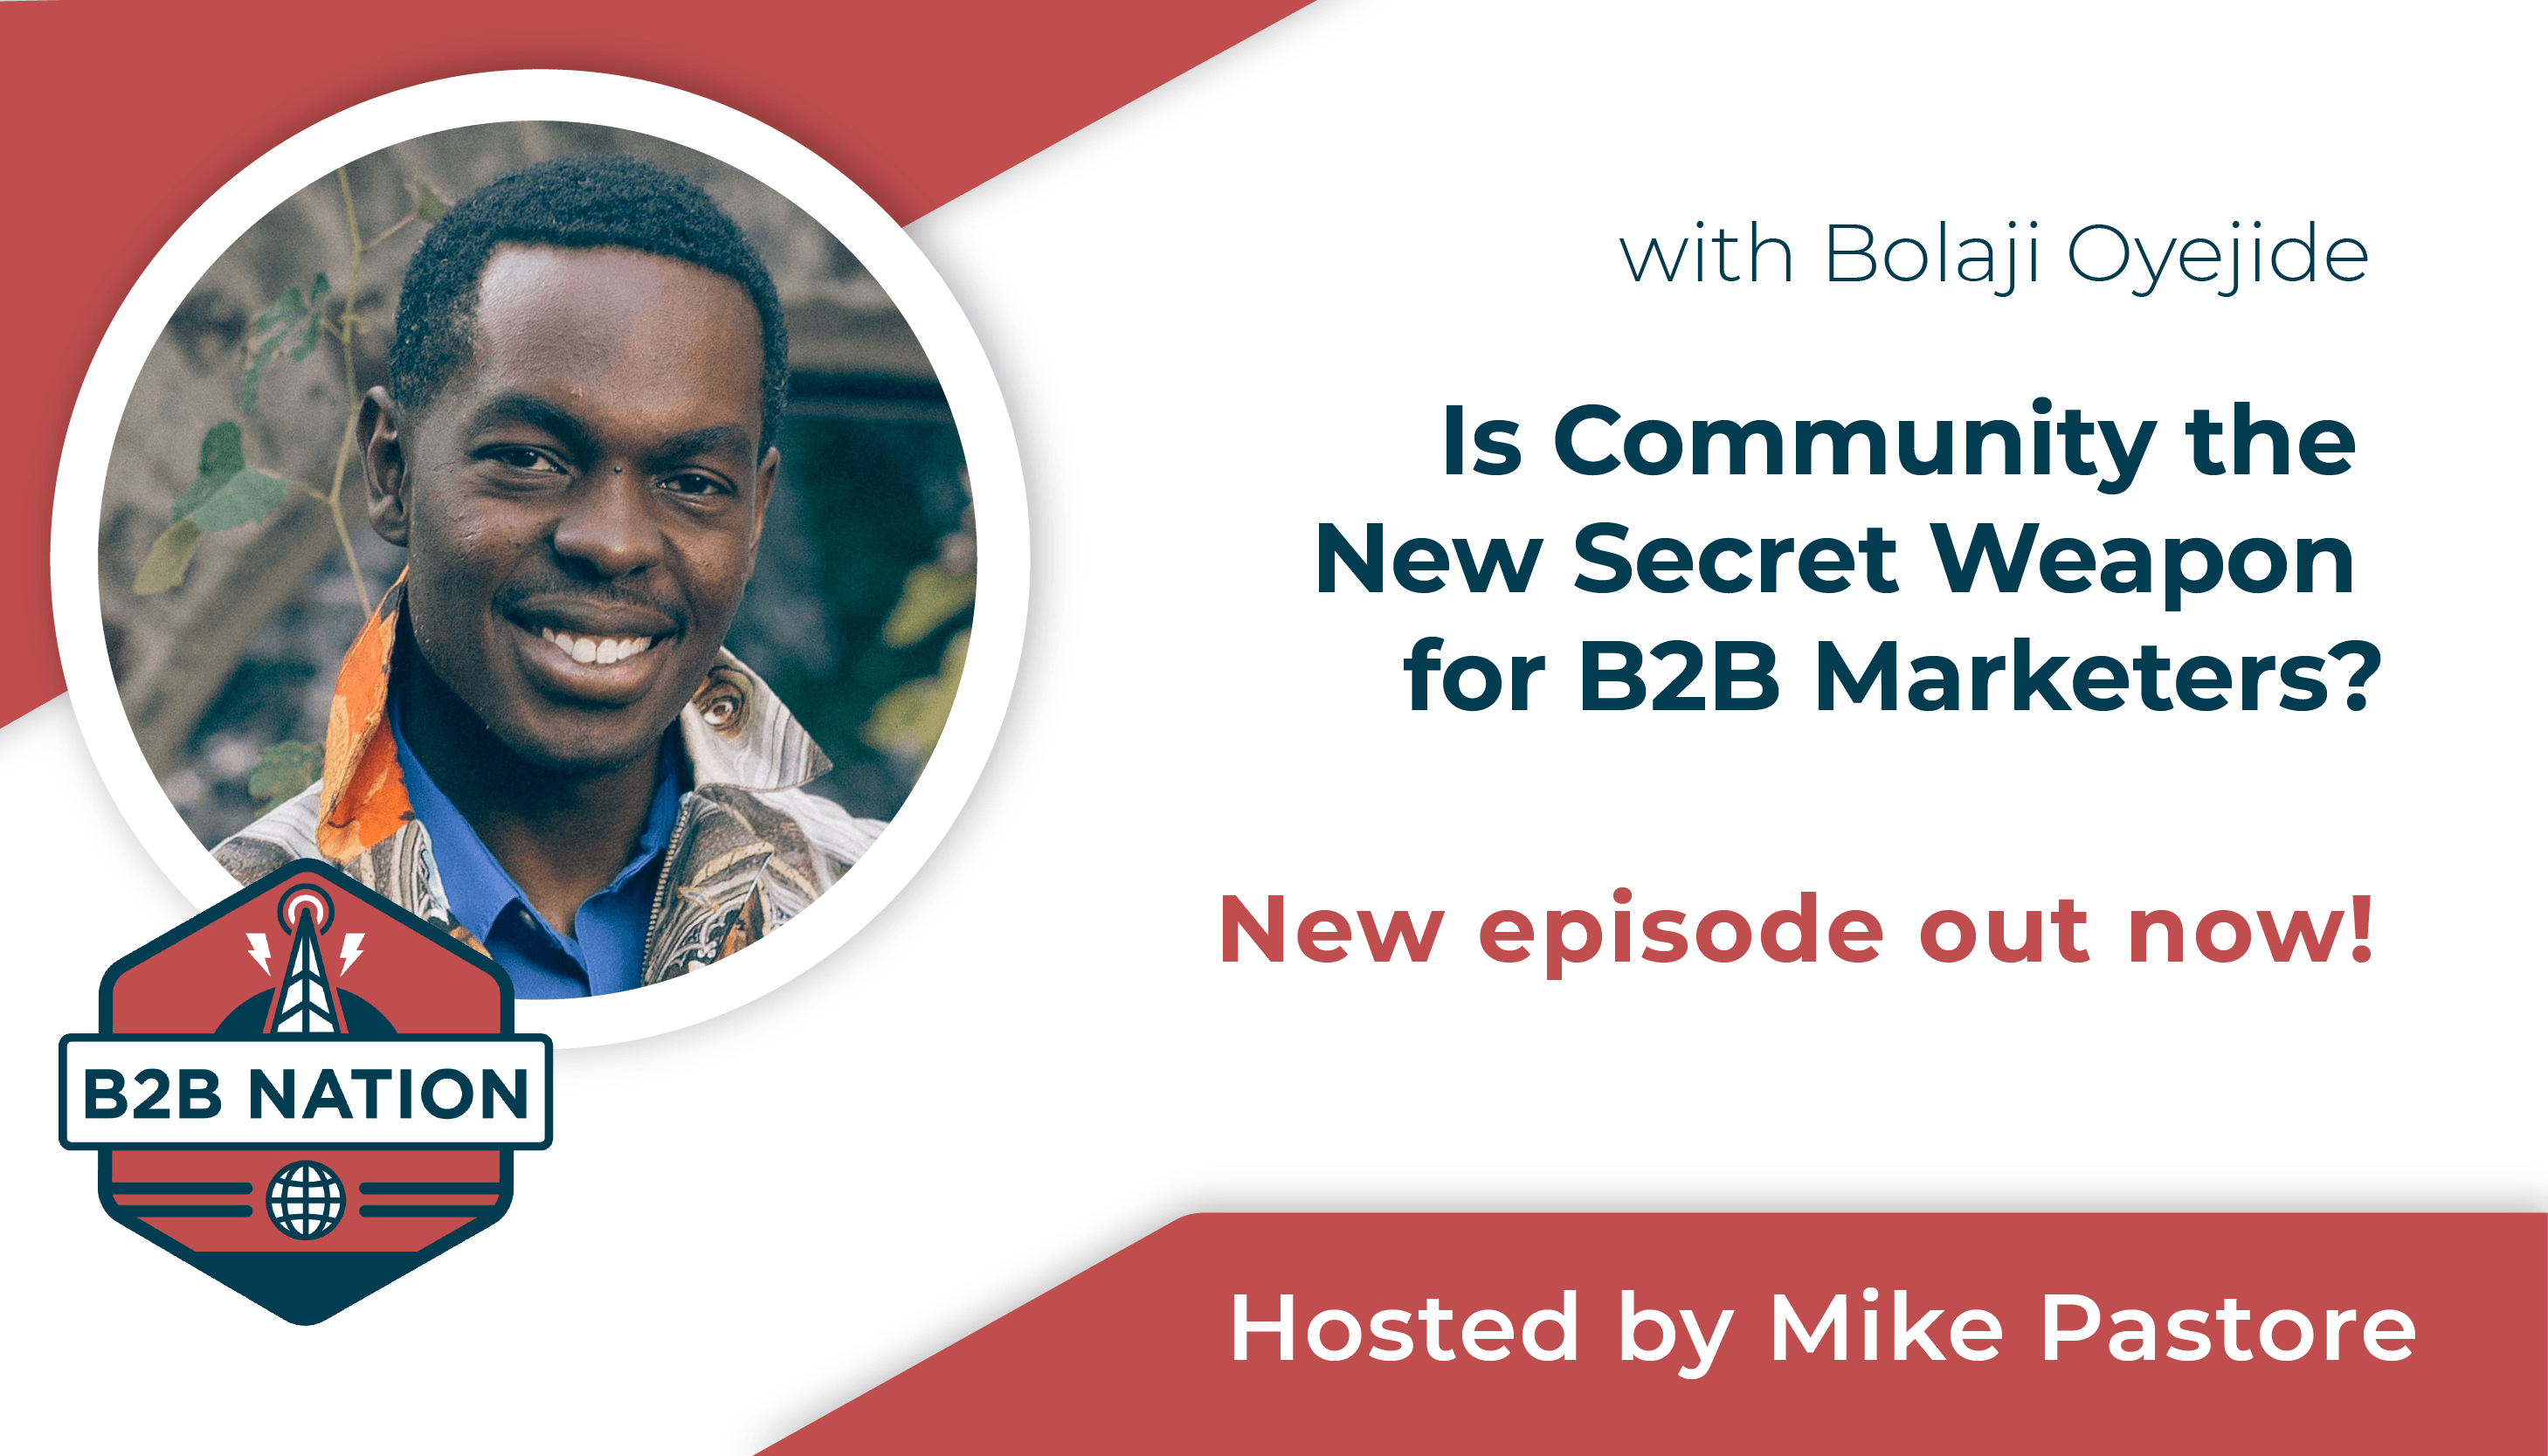 Is Creating Community the New Secret Weapon for B2B Marketers?